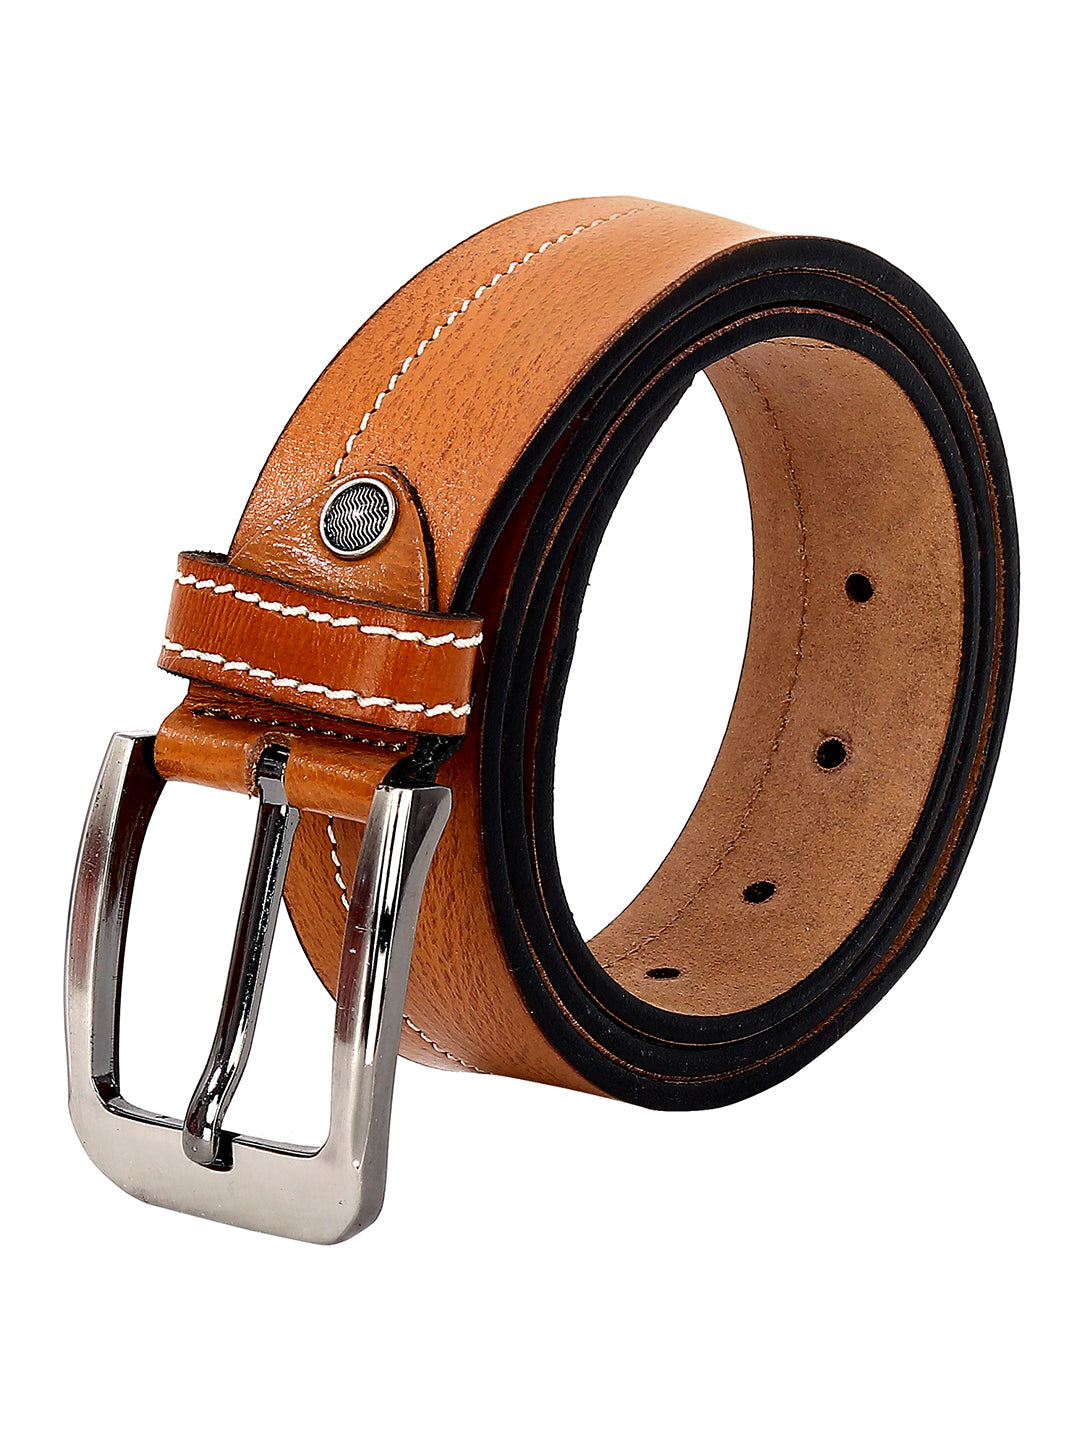 Leather World Pin Lock Buckle Genuine Leather Formal Casual Brown Belt